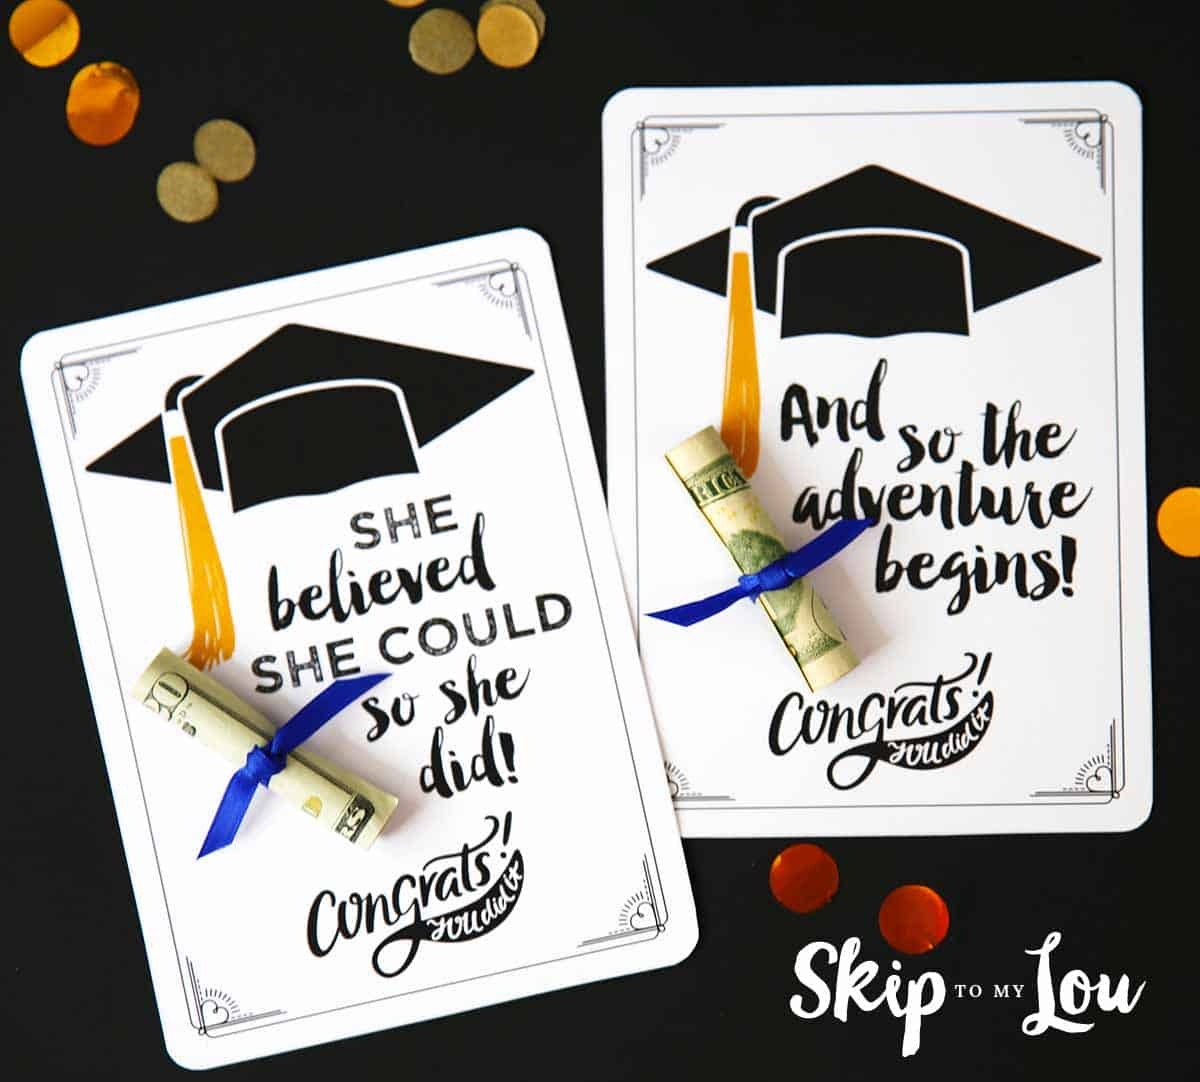 Free Graduation Cards With Positive Quotes And Cash! - Graduation Cards Free Printable Funny